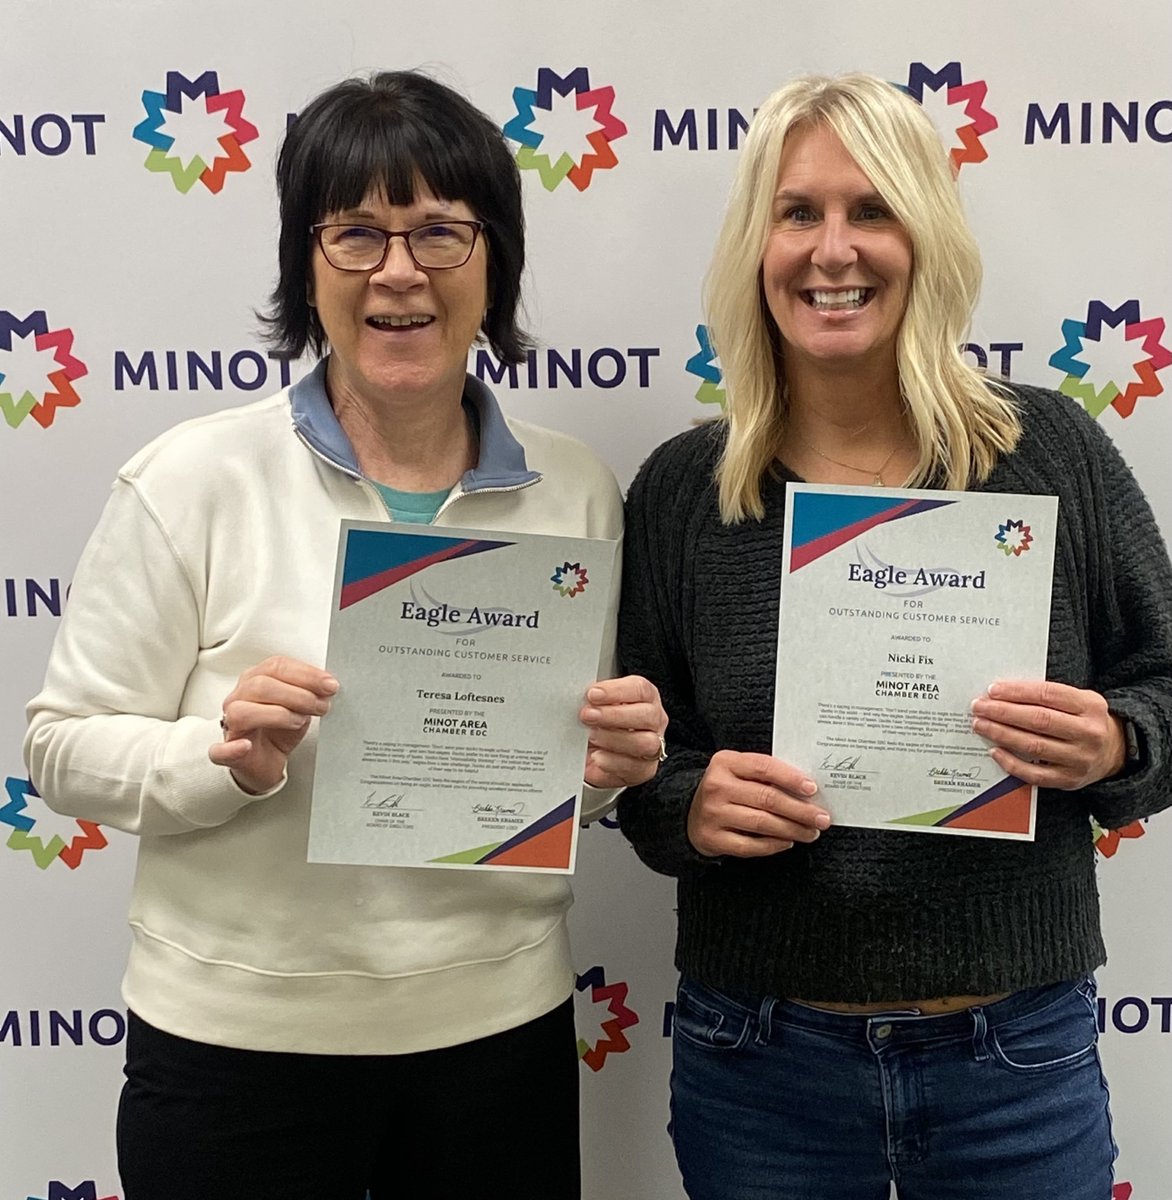 Join us in celebrating Nicki and Teresa as they receive the prestigious Eagle Award from the Minot Area Chamber EDC for their outstanding commitment to excellent customer service! 🎉 

Nicki is Operations Manager of Norsk Høstfest and Teresa is Volunteer Coordinator 👏